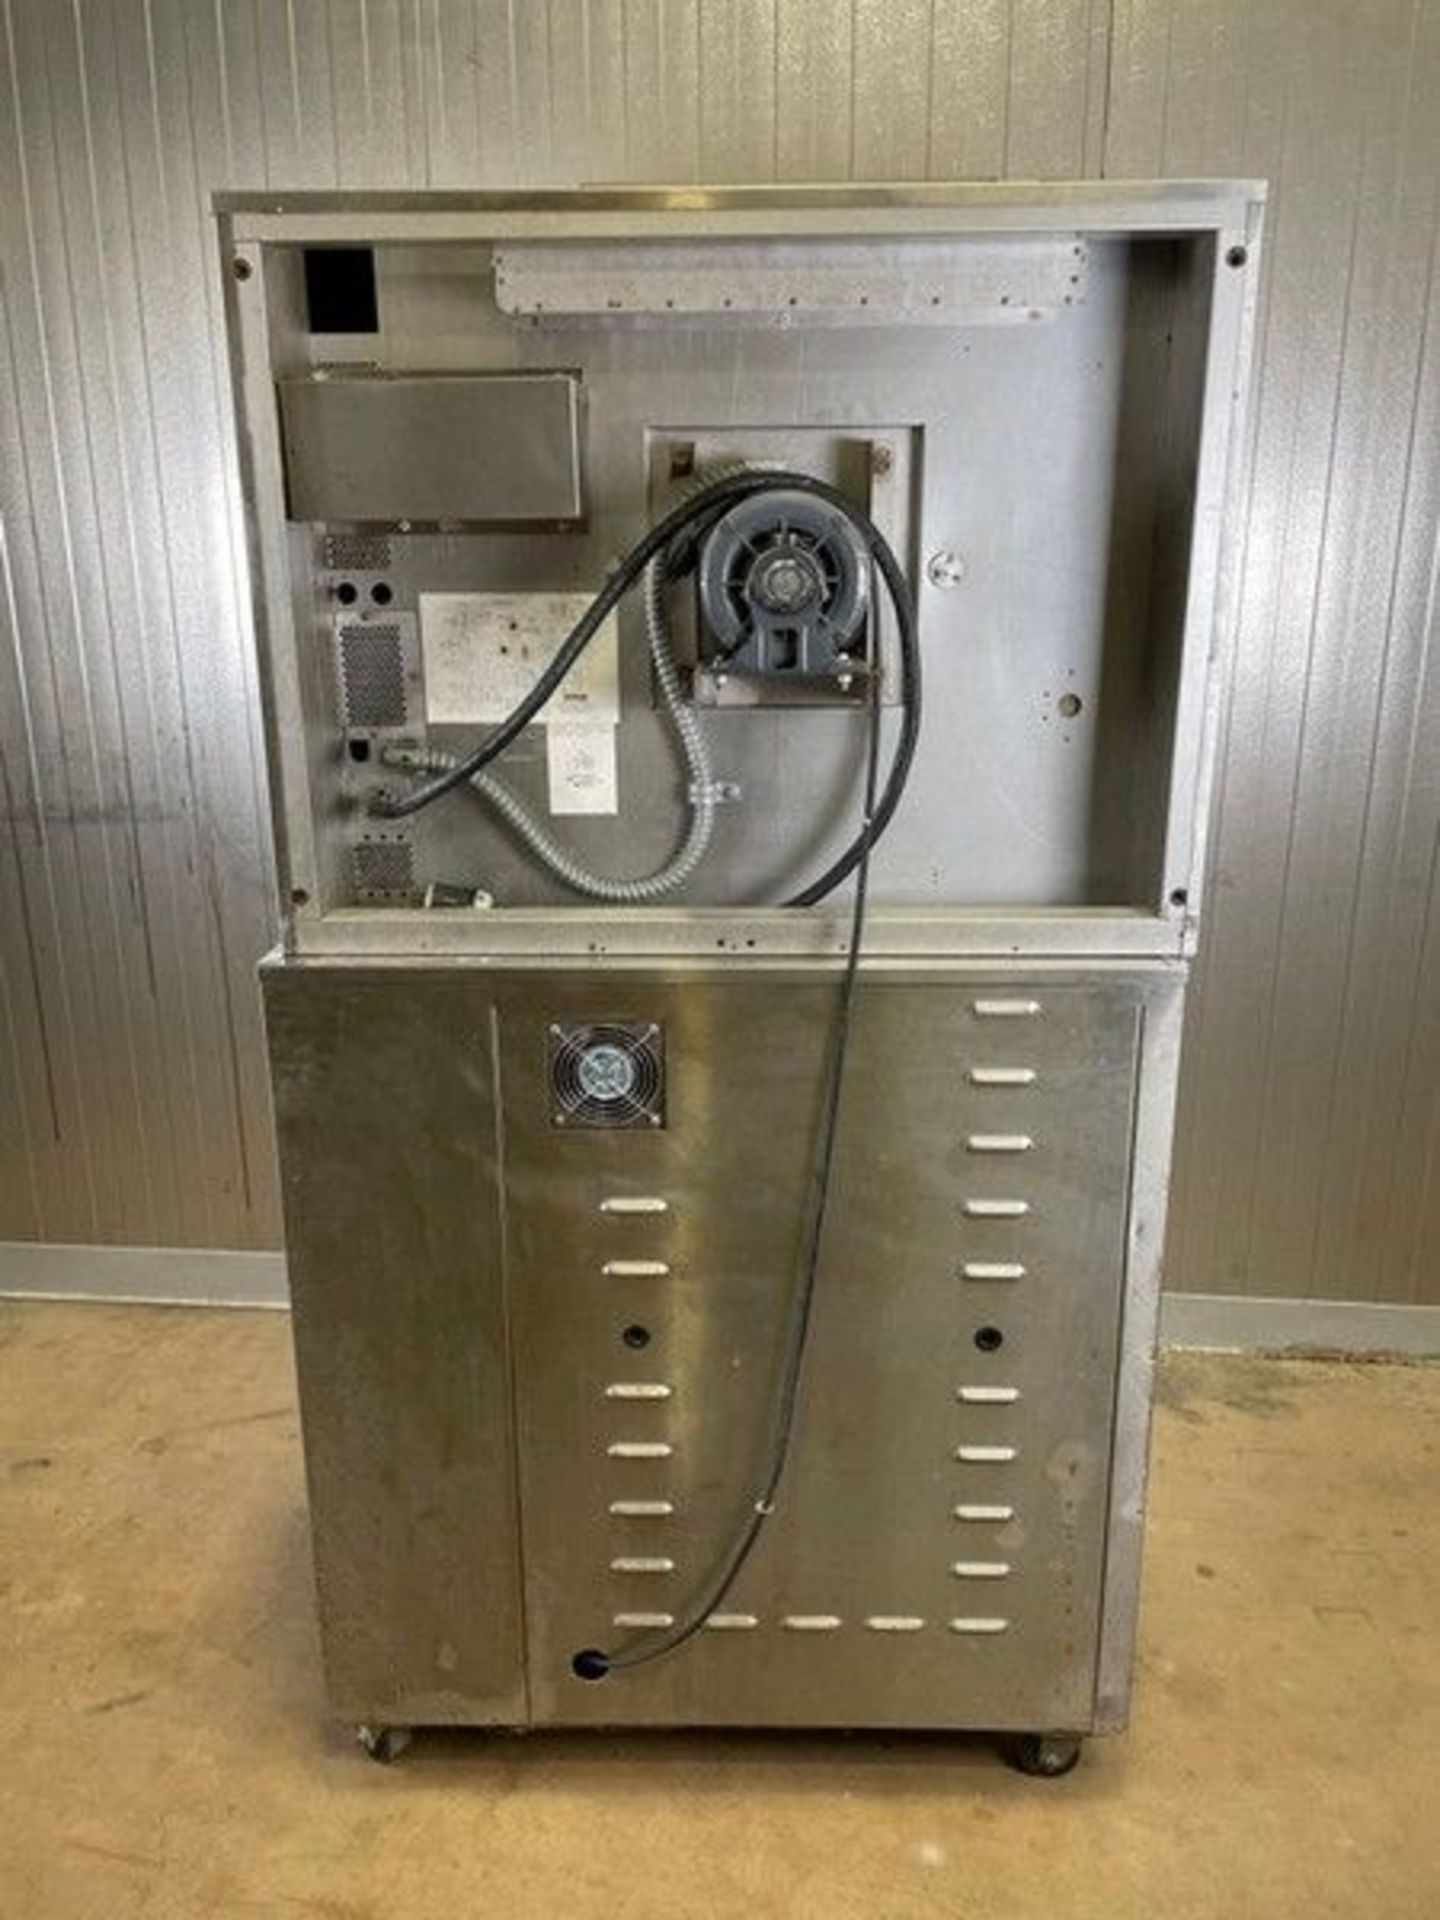 Blodgett Oven & Proofer, 230 Volts, 1 Phase, Proofer is Bottom Portion of Unit (Auction ID da67e738) - Image 3 of 6